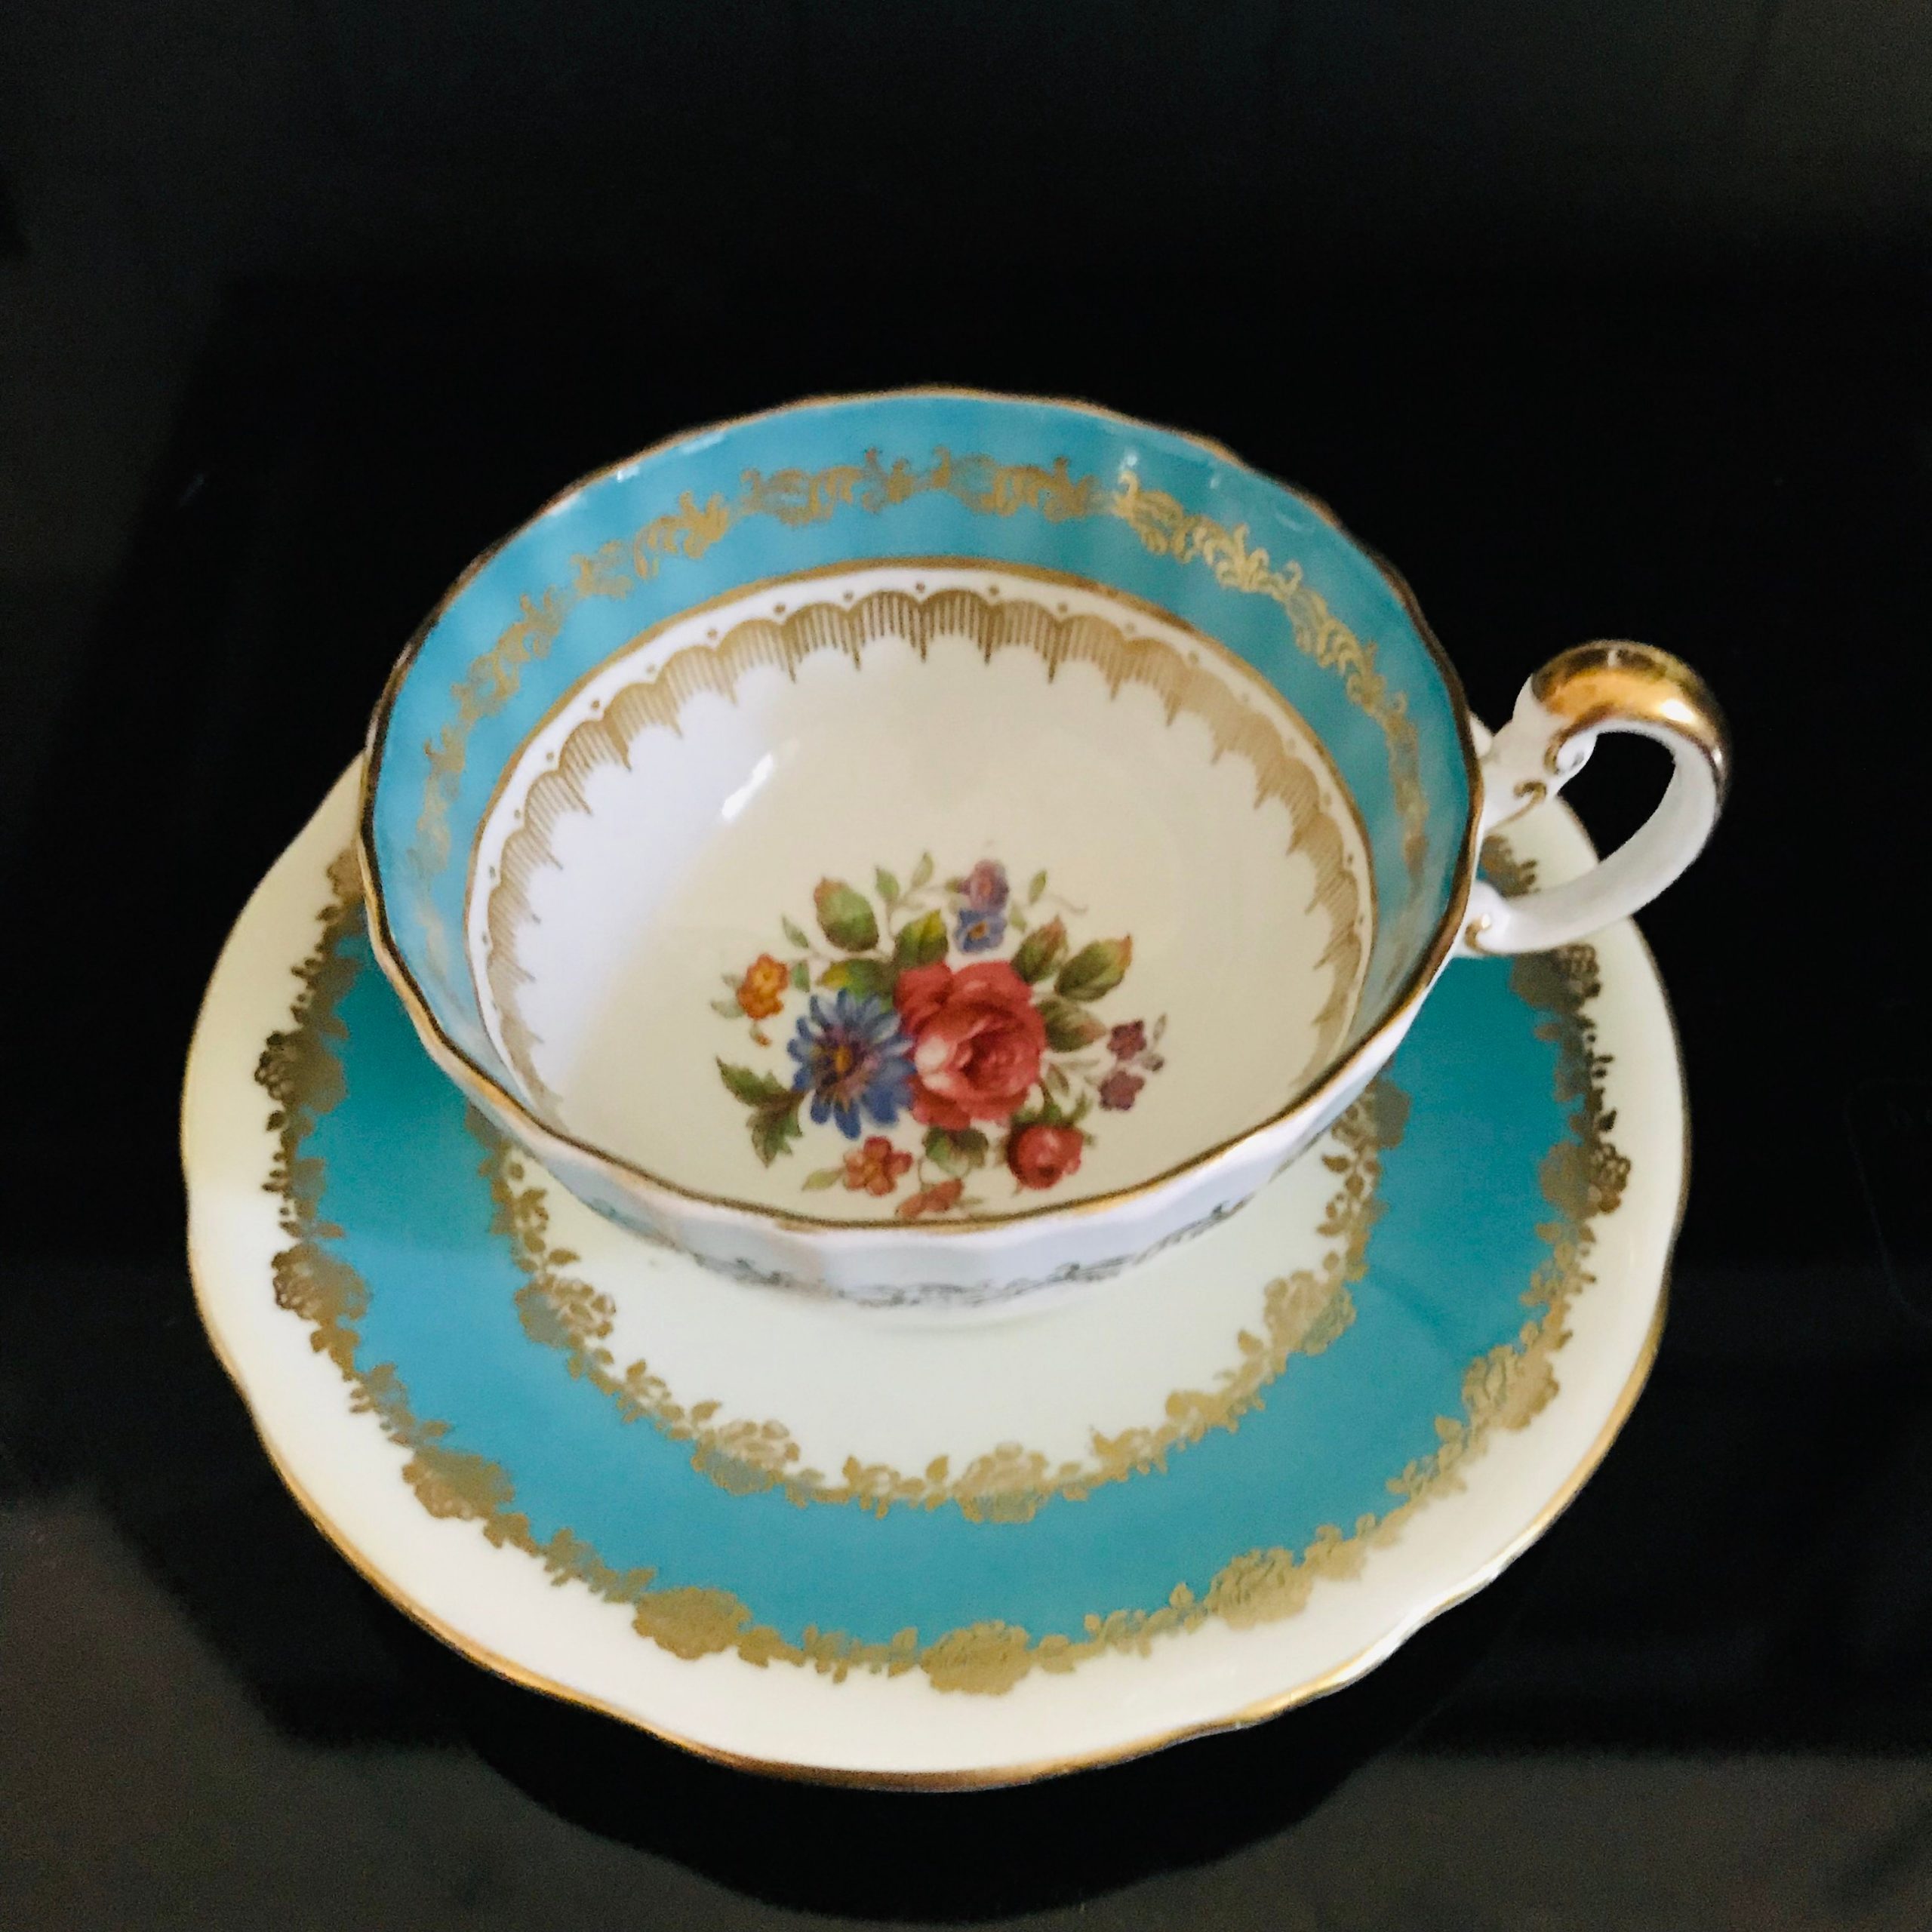 Aynsley Tea Cup And Saucer Turquoise Blue Floral Center Pattern Fine Bone China England